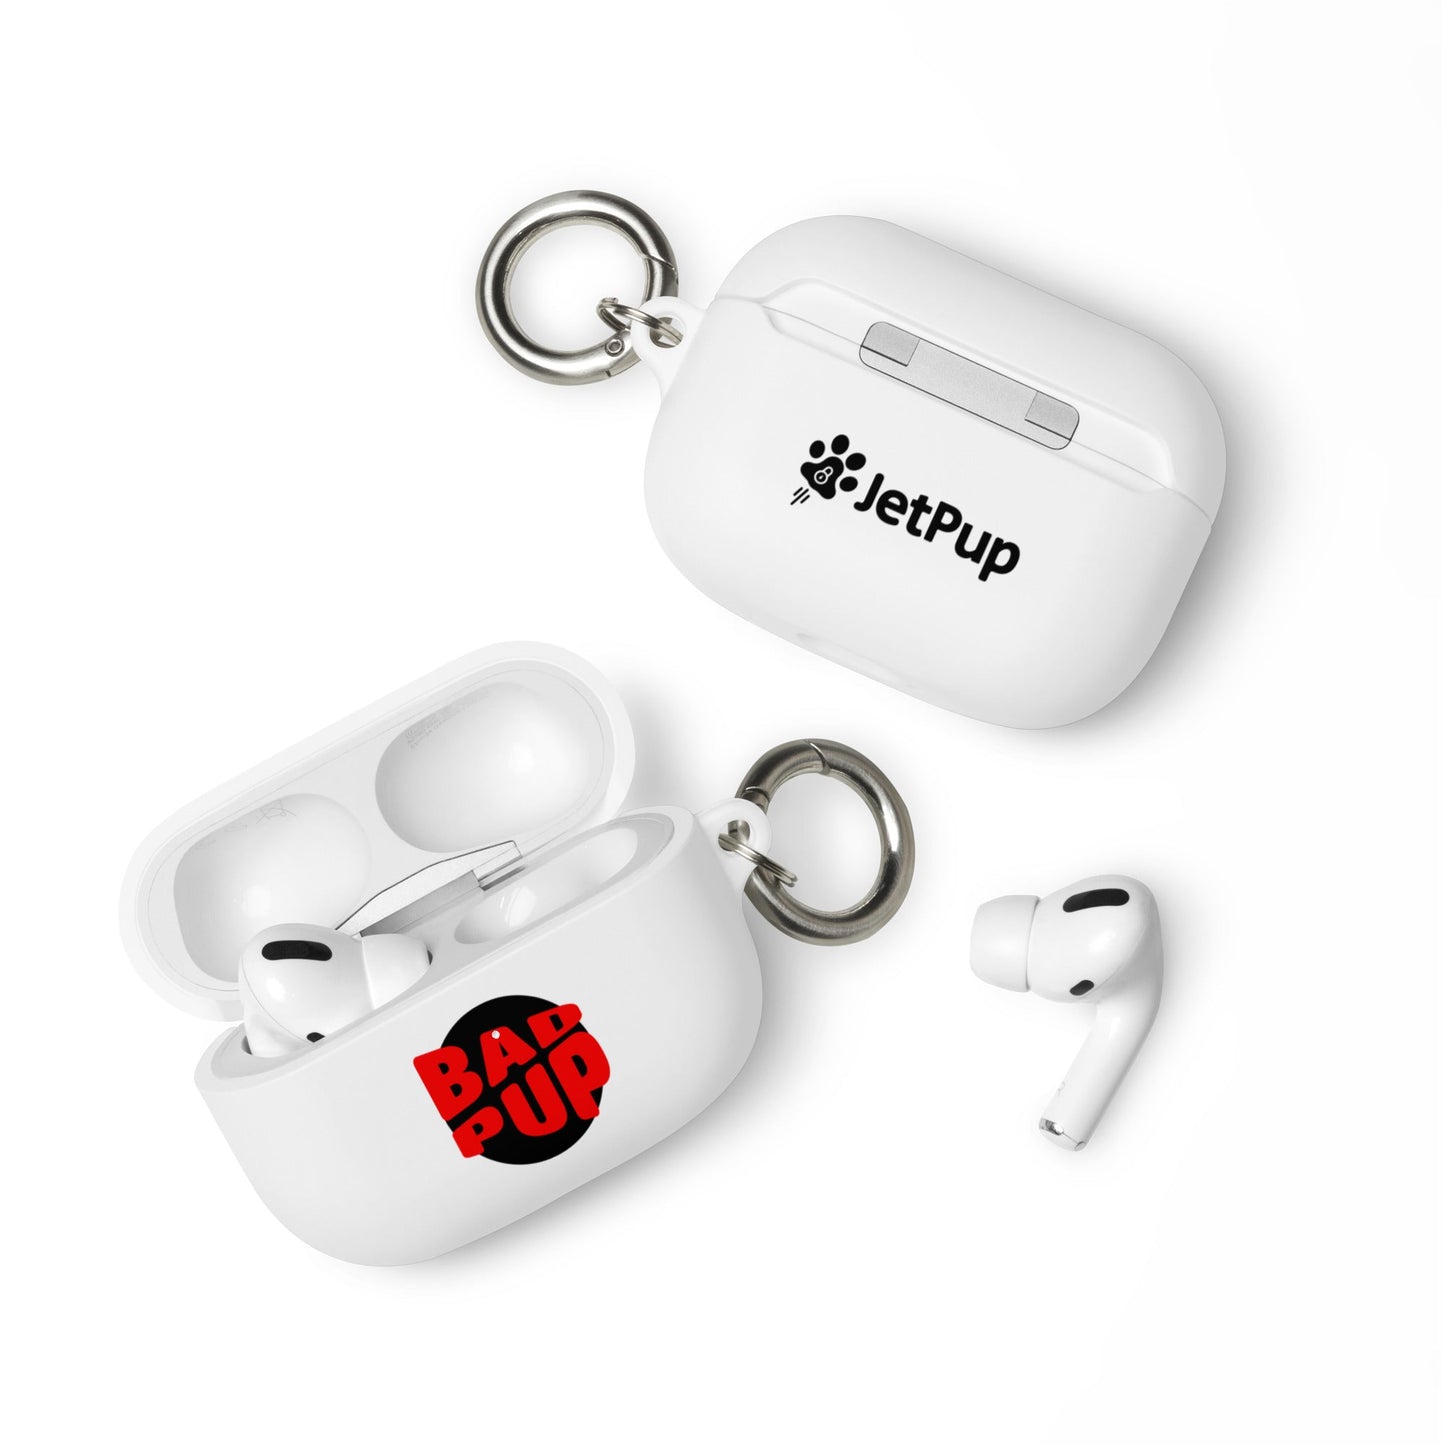 Bad Pup AirPods Case - White - JetPup